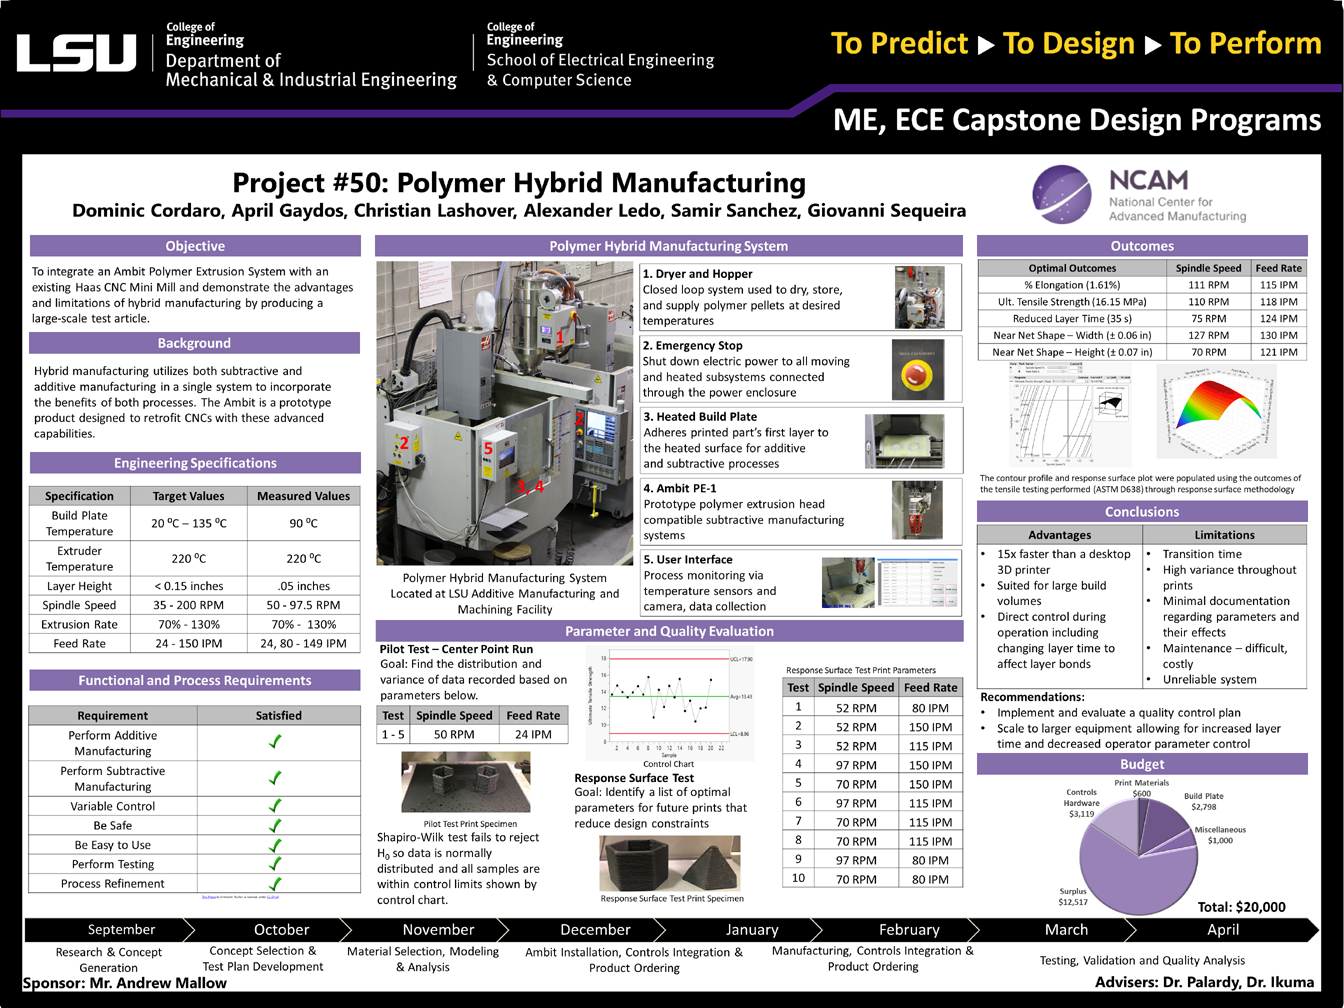 Project 50: Polymer Hybrid Manufacturing (2019)